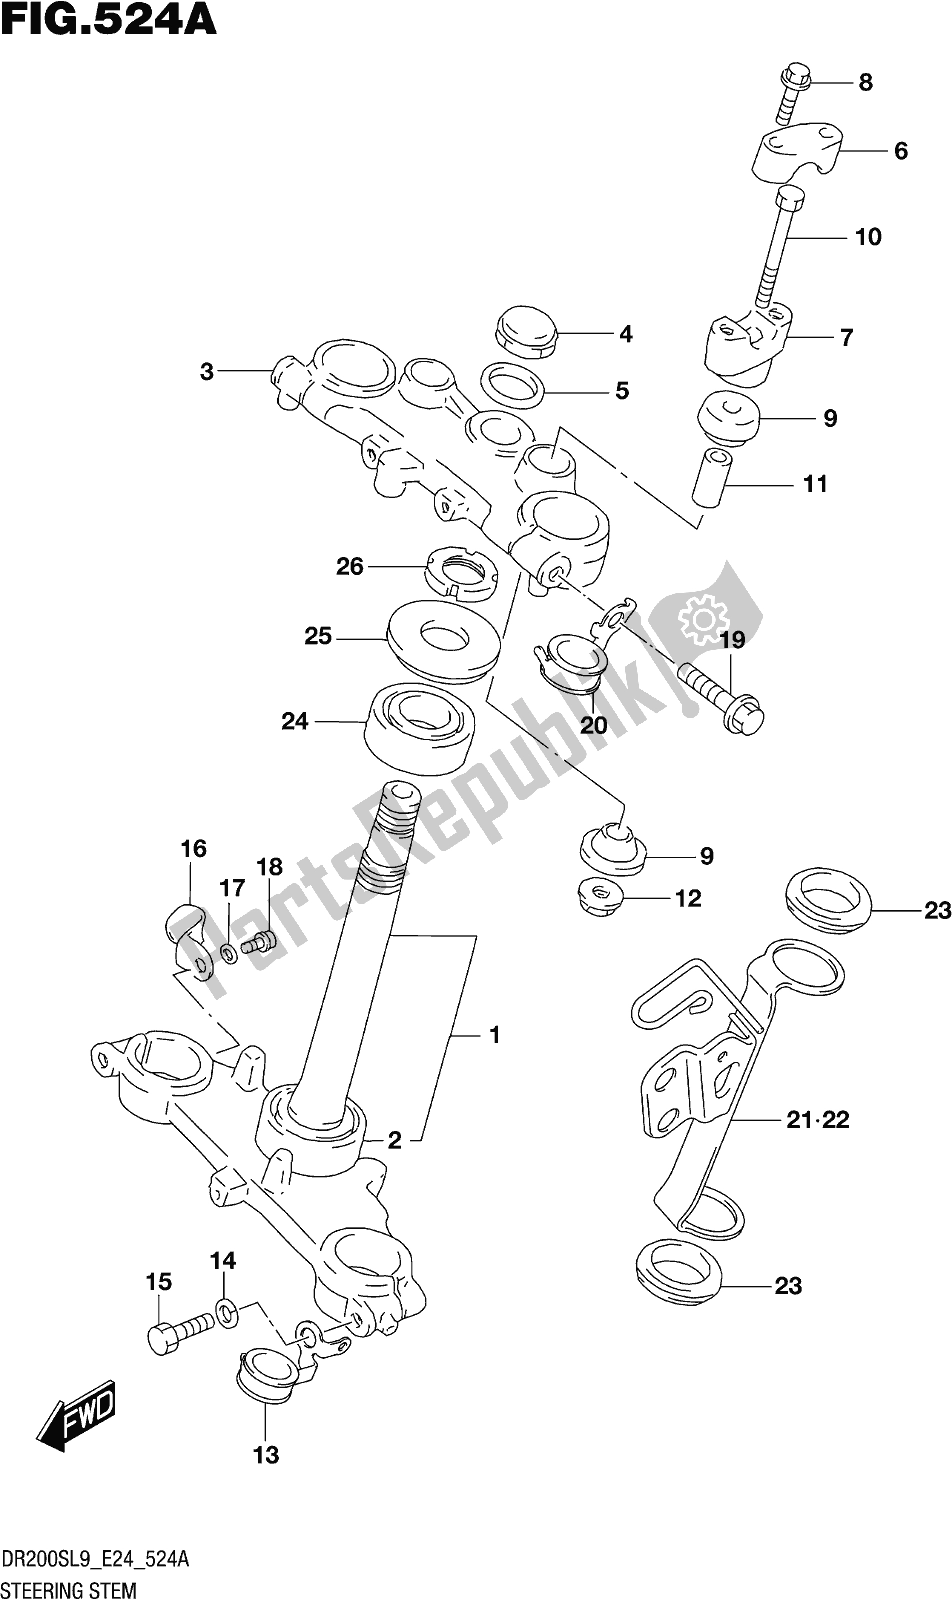 All parts for the Fig. 524a Steering Stem of the Suzuki DR 200S 2019